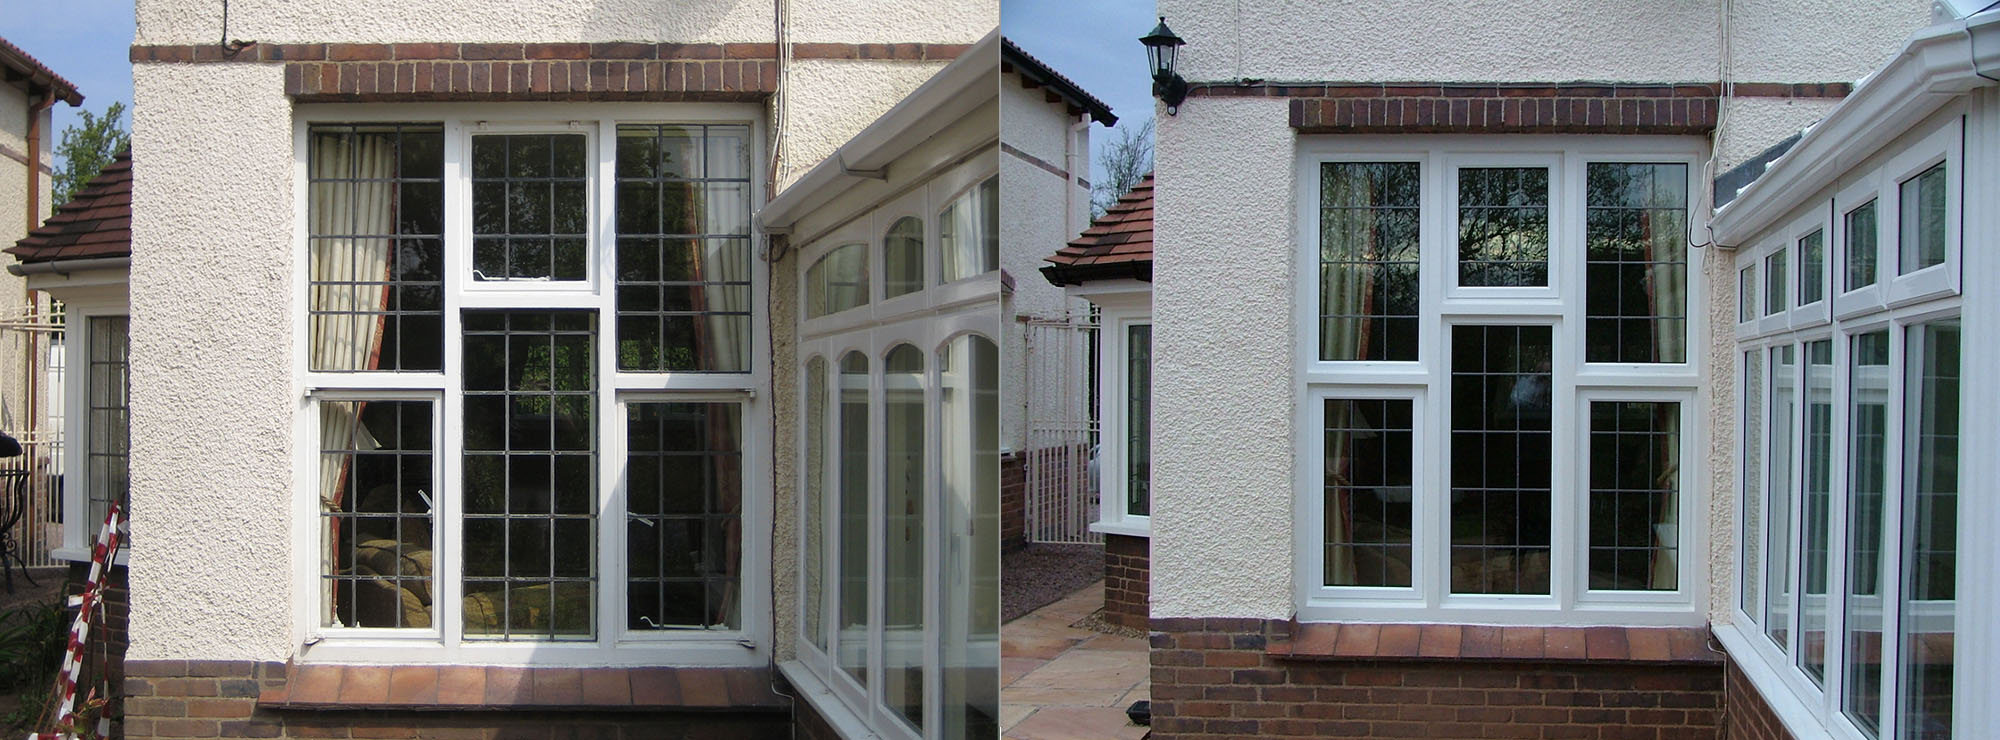 <strong>Period property in Shropshire.</strong>Replacement of steel casement windows with white commercial aluminium inserts into existing timber sub frames.